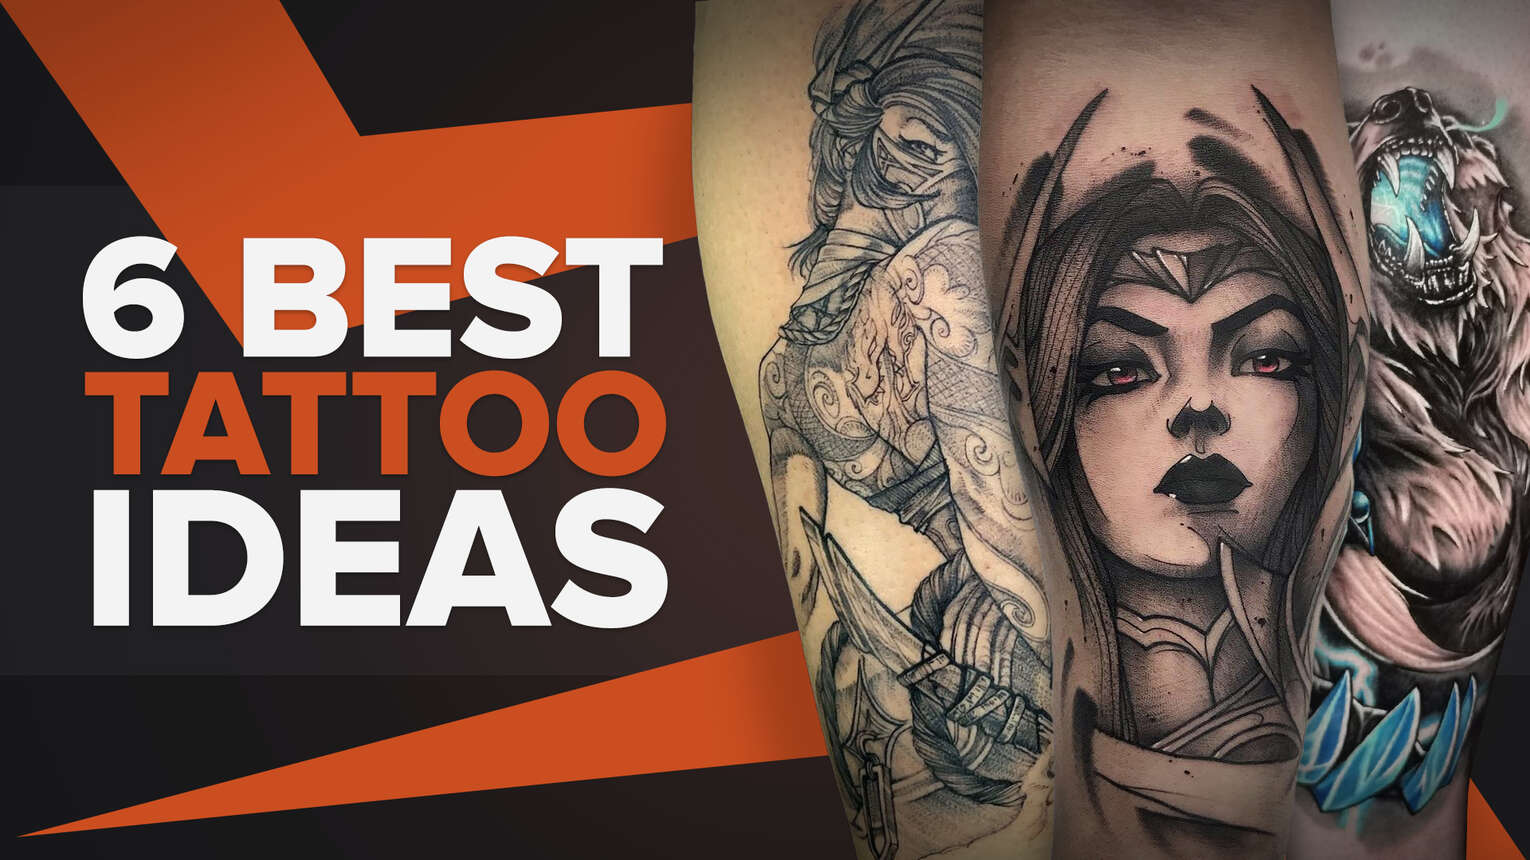 30 Amazing Tattoos That Transform When People Move Their Bodies | DeMilked